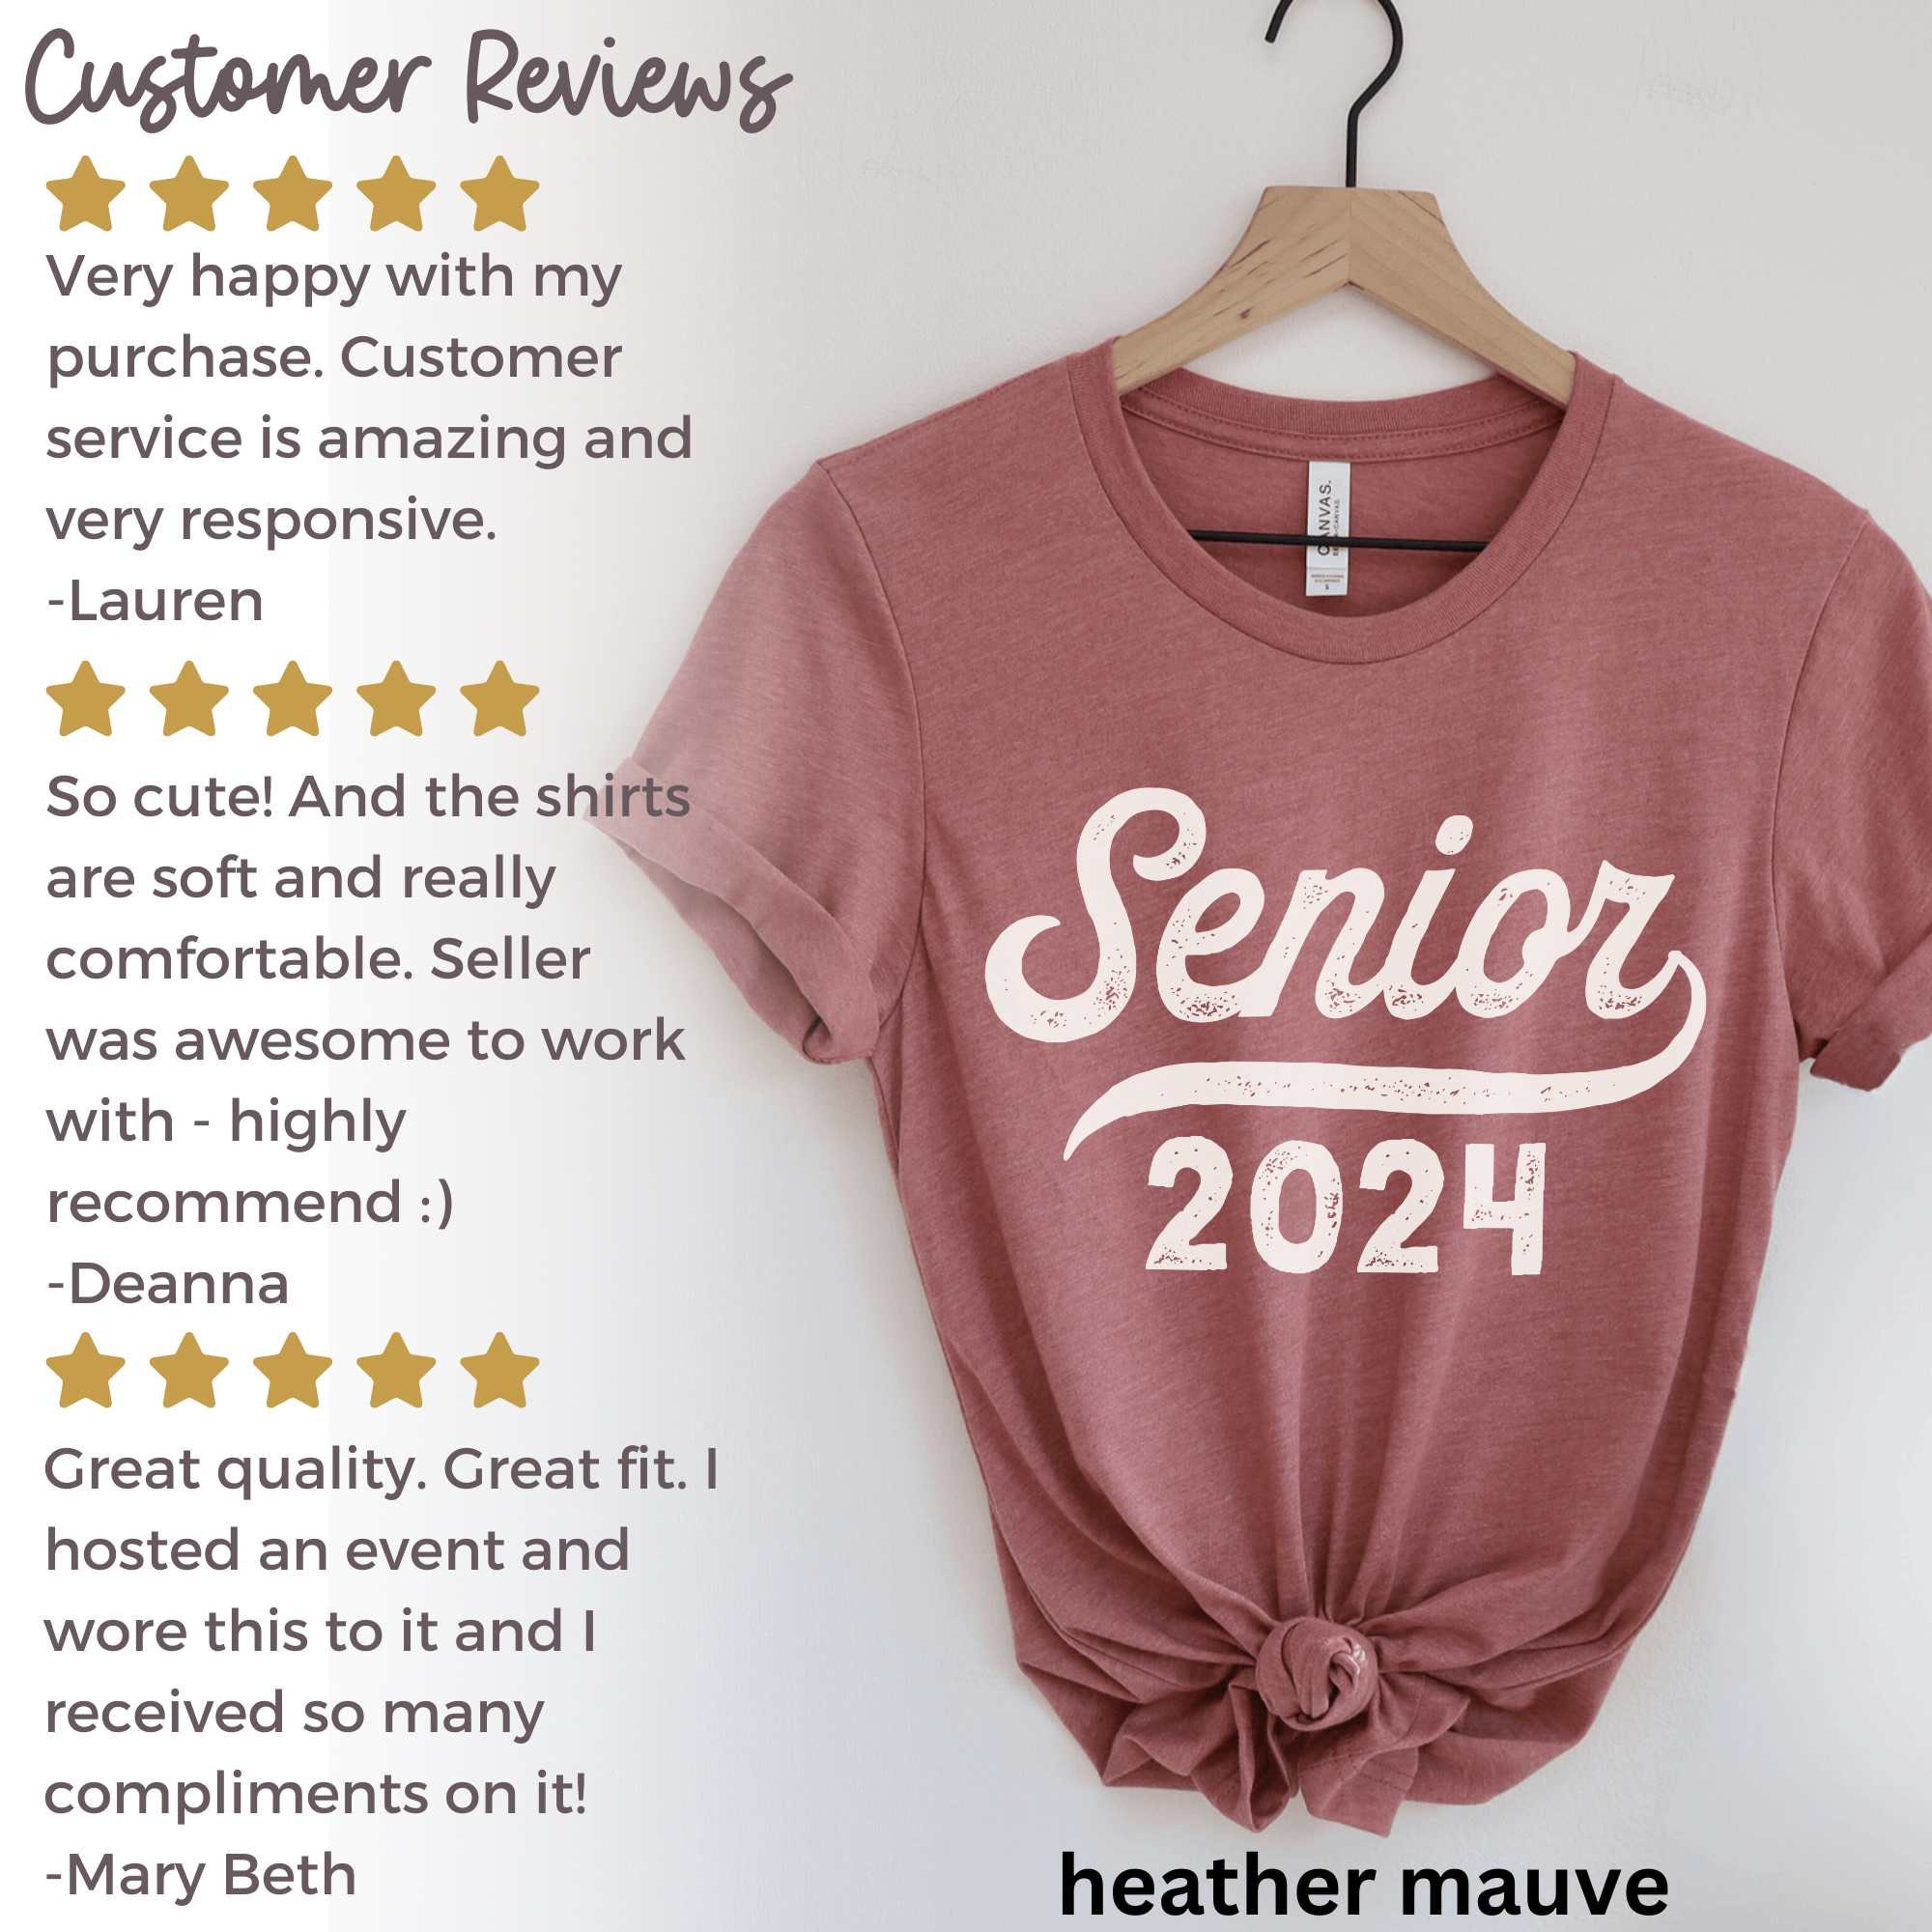 Class Of 2024 Senior 2024 Graduation Or First Day Of School Cute Gift Tall  T-Shirt